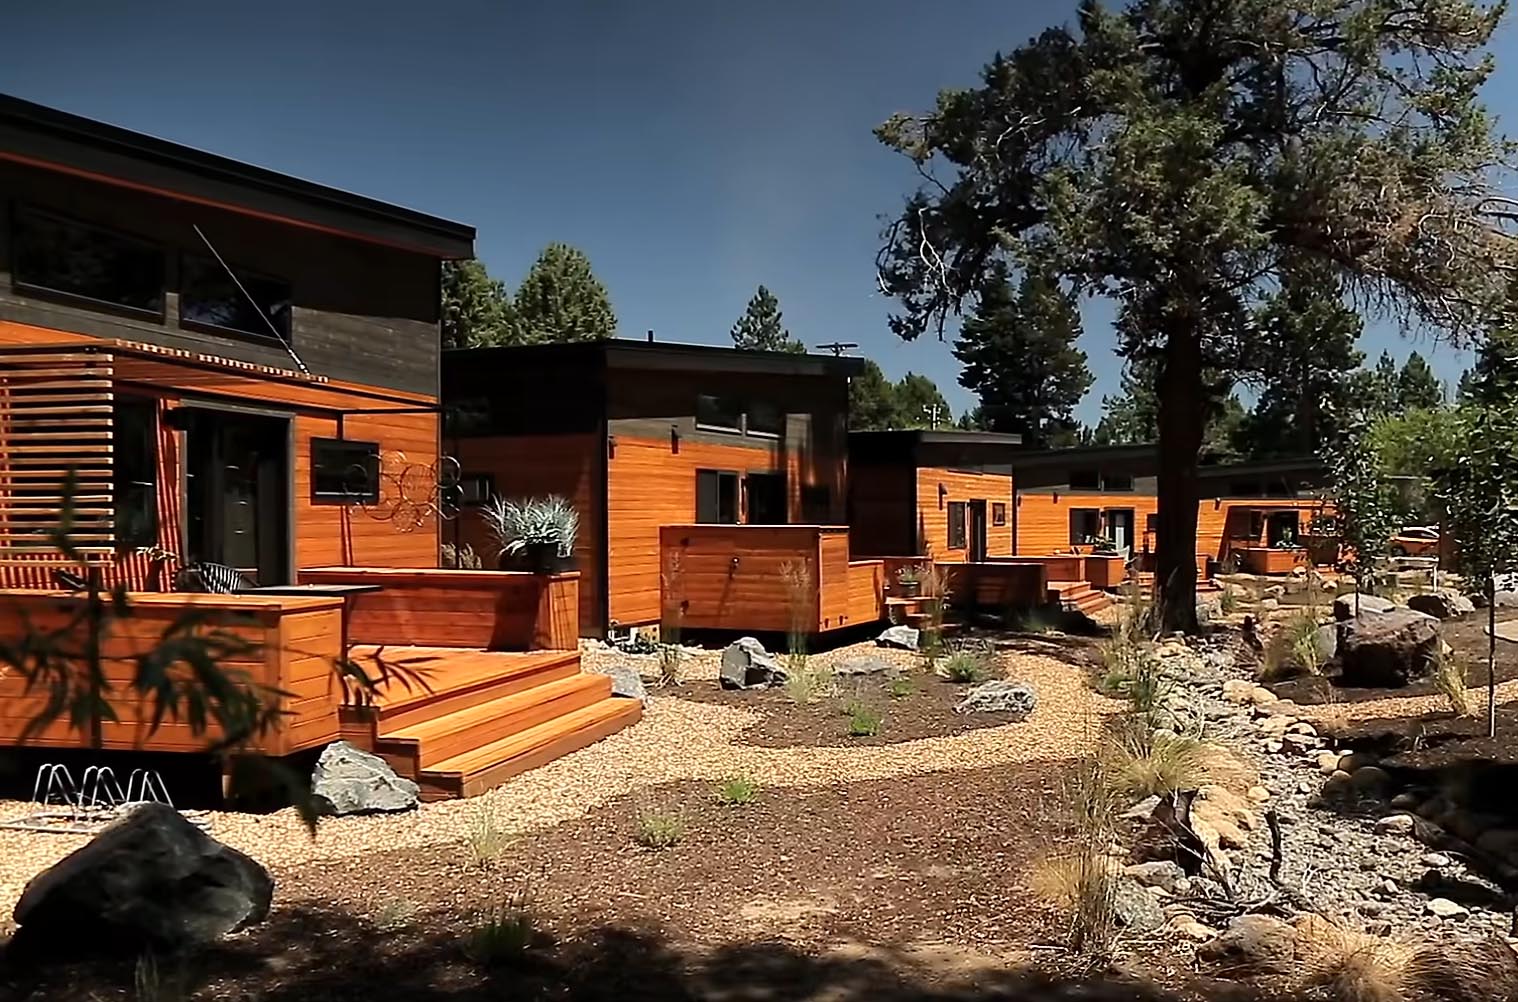 This Tiny House Community Feels Like Living In A Small Village Home